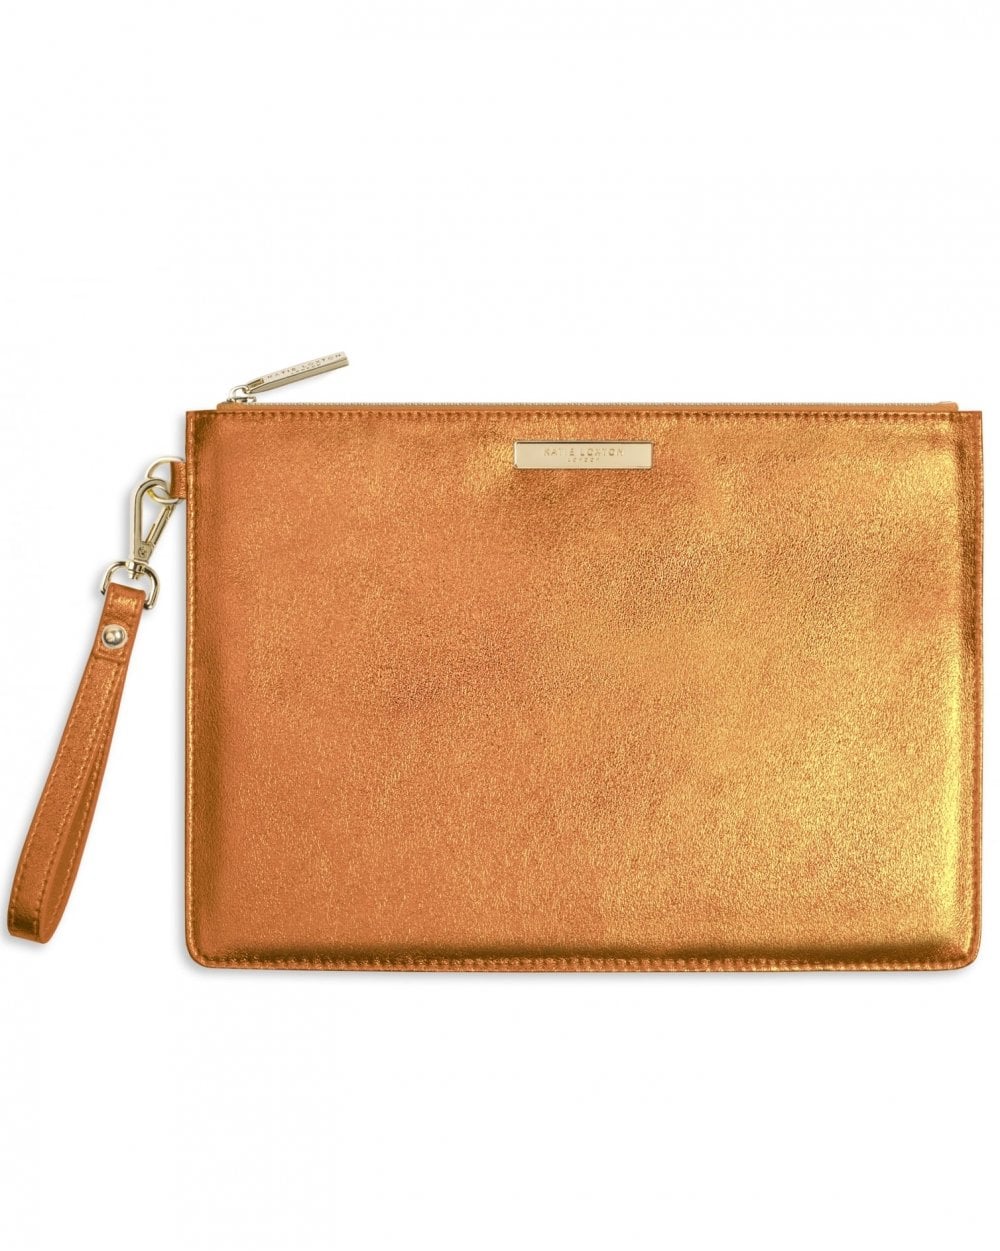 Luxe Clutch with Wrist Strap